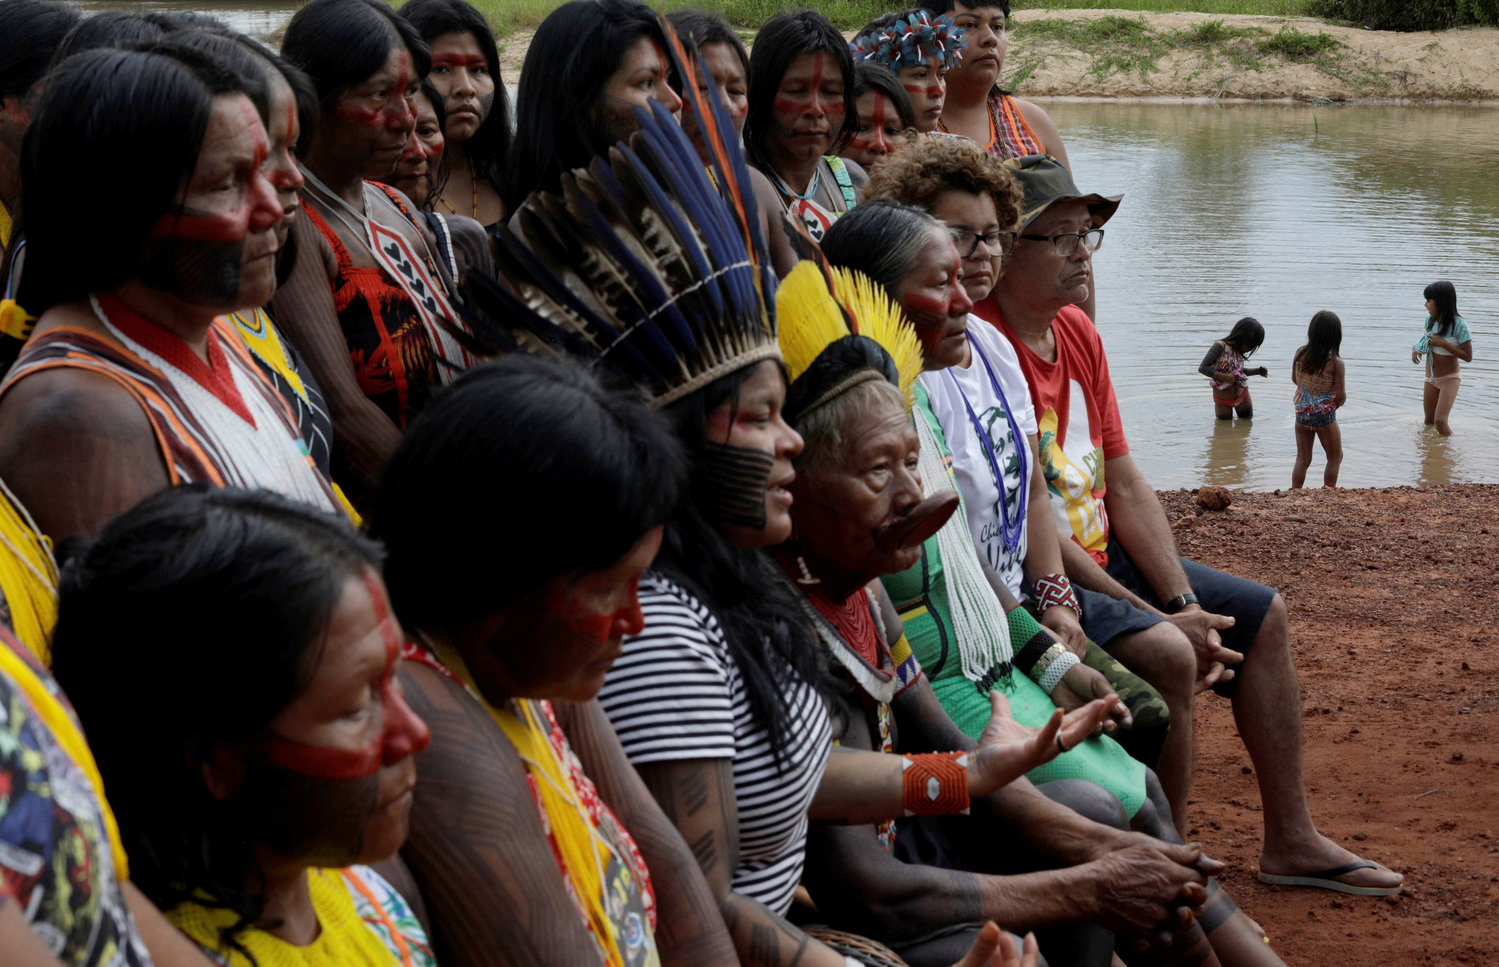 Indigenous people are seen on the banks of the Xingu River during a media event in Brazil’s Xingu Indigenous Park Jan. 15, 2020.